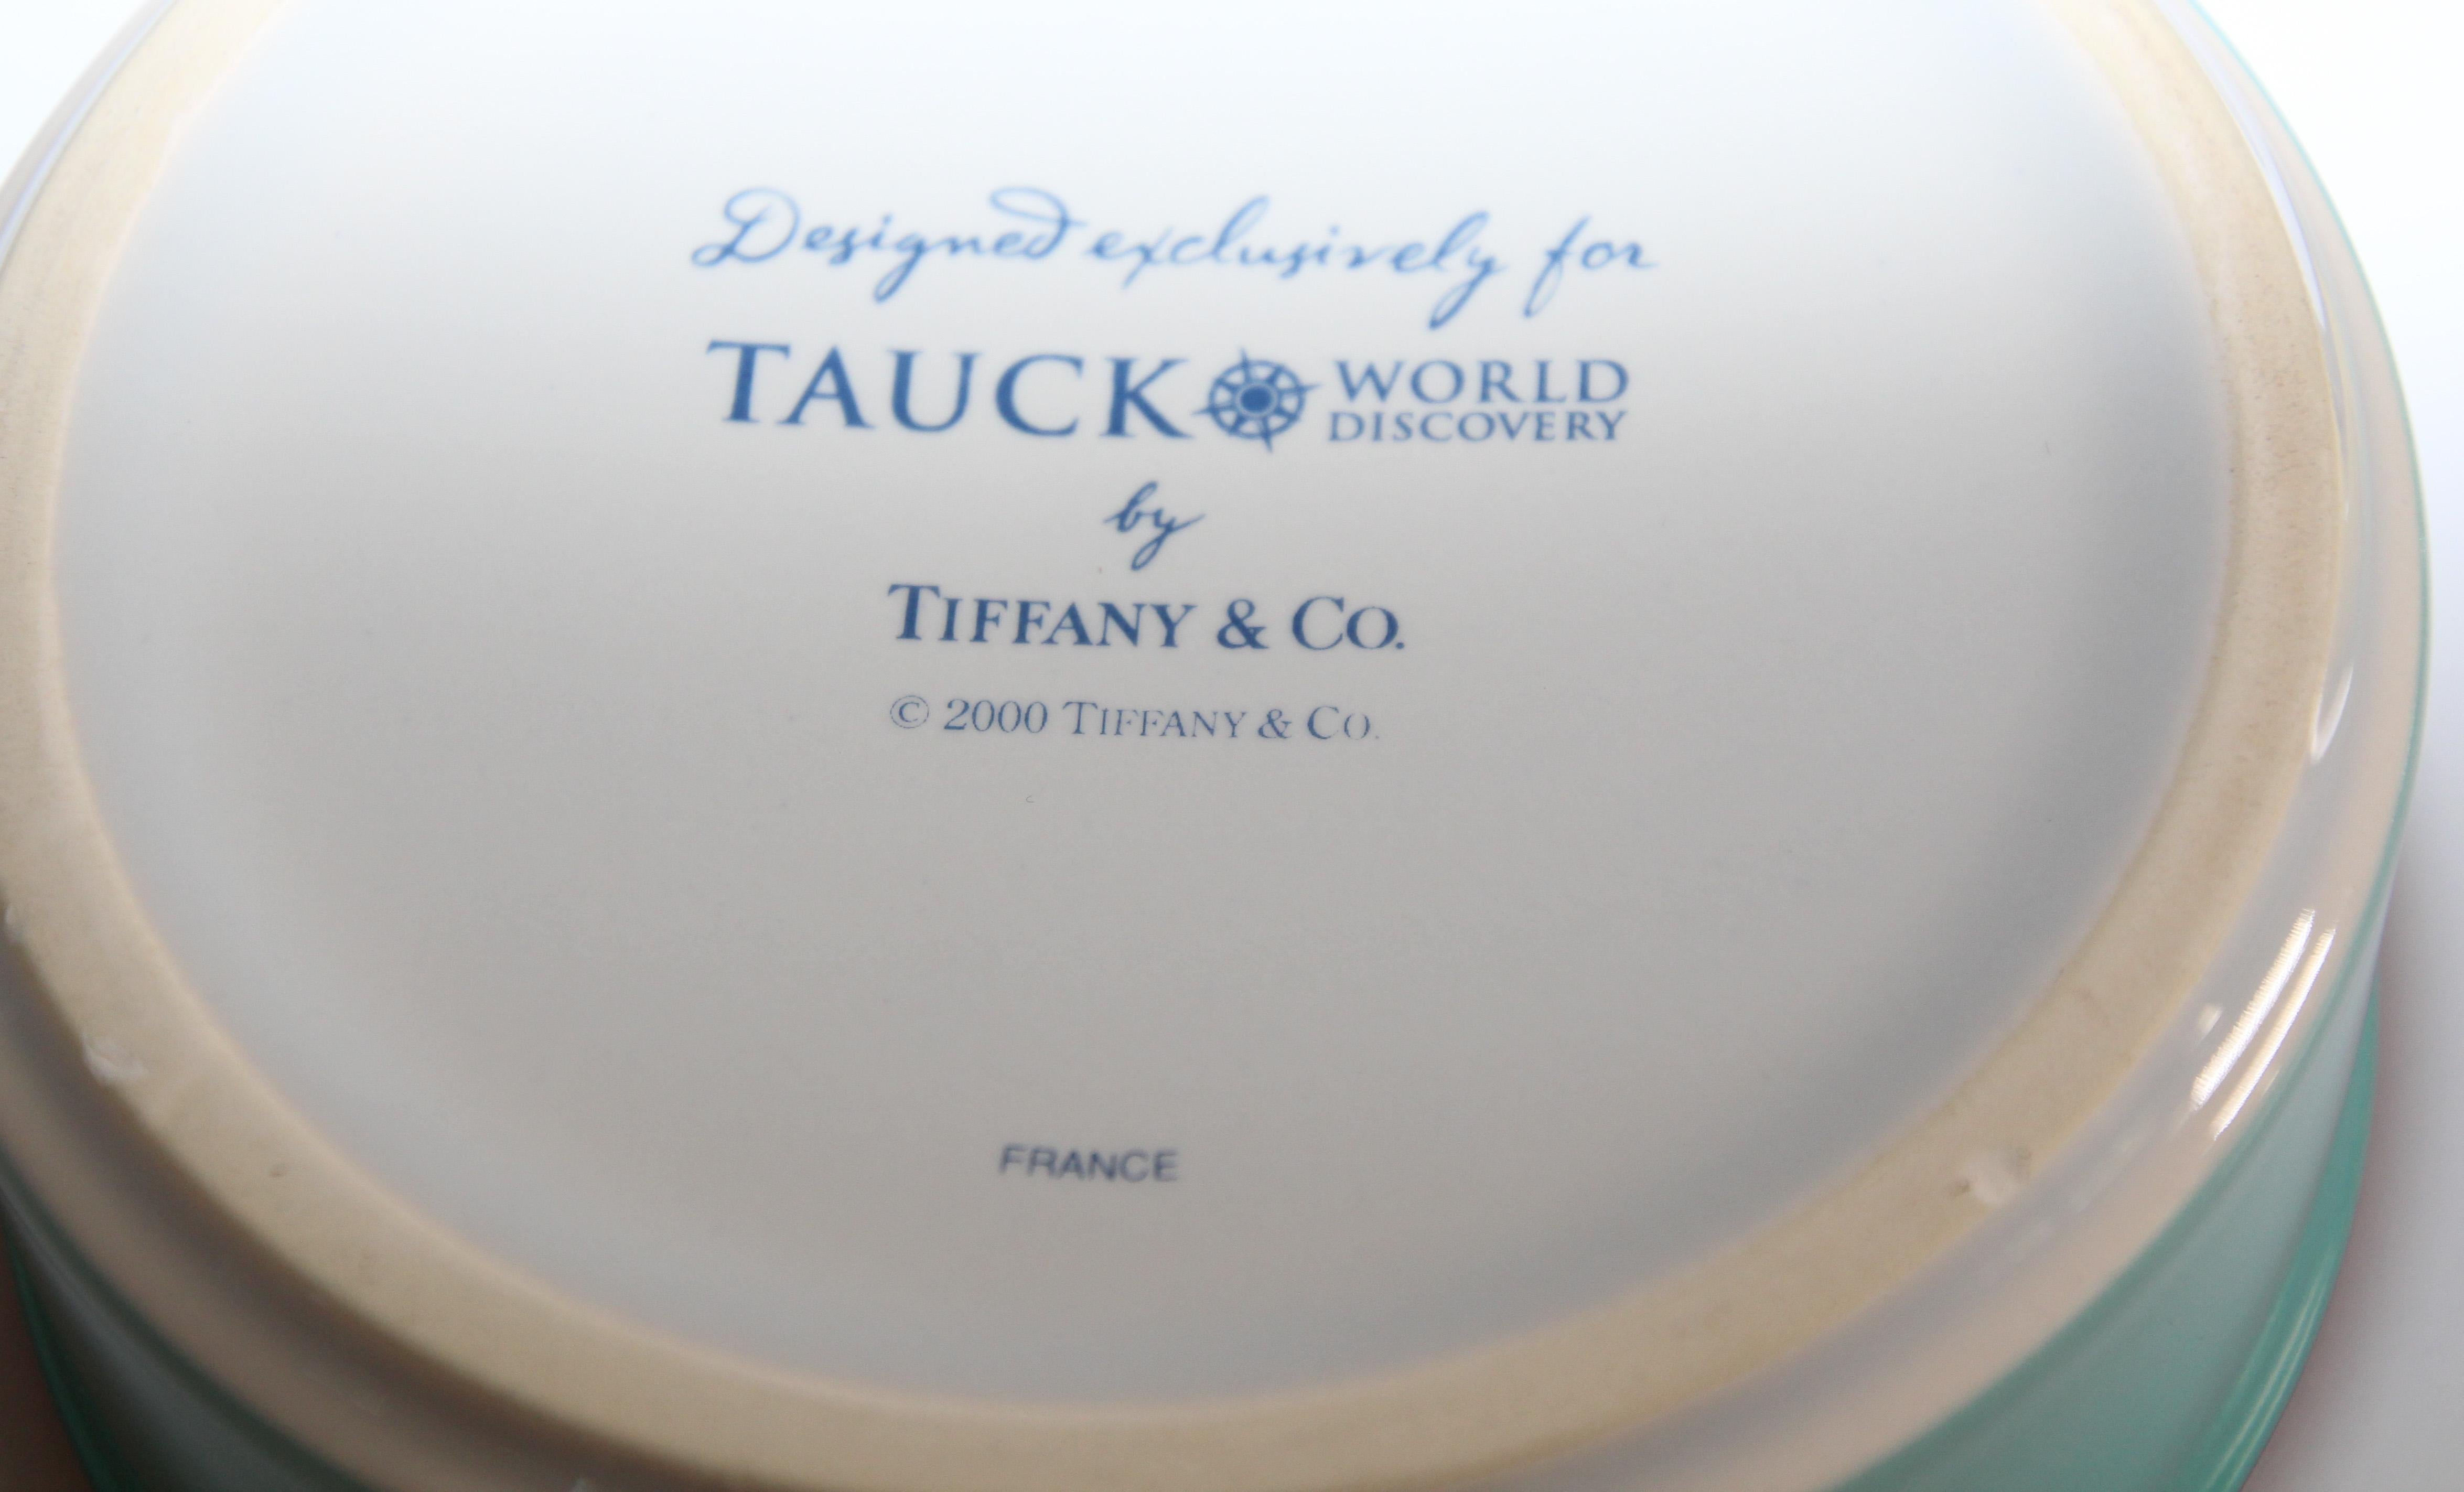 Tiffany & Co. Porcelain Lidded Trinket Box Designed for Tauck World France In Good Condition For Sale In North Hollywood, CA